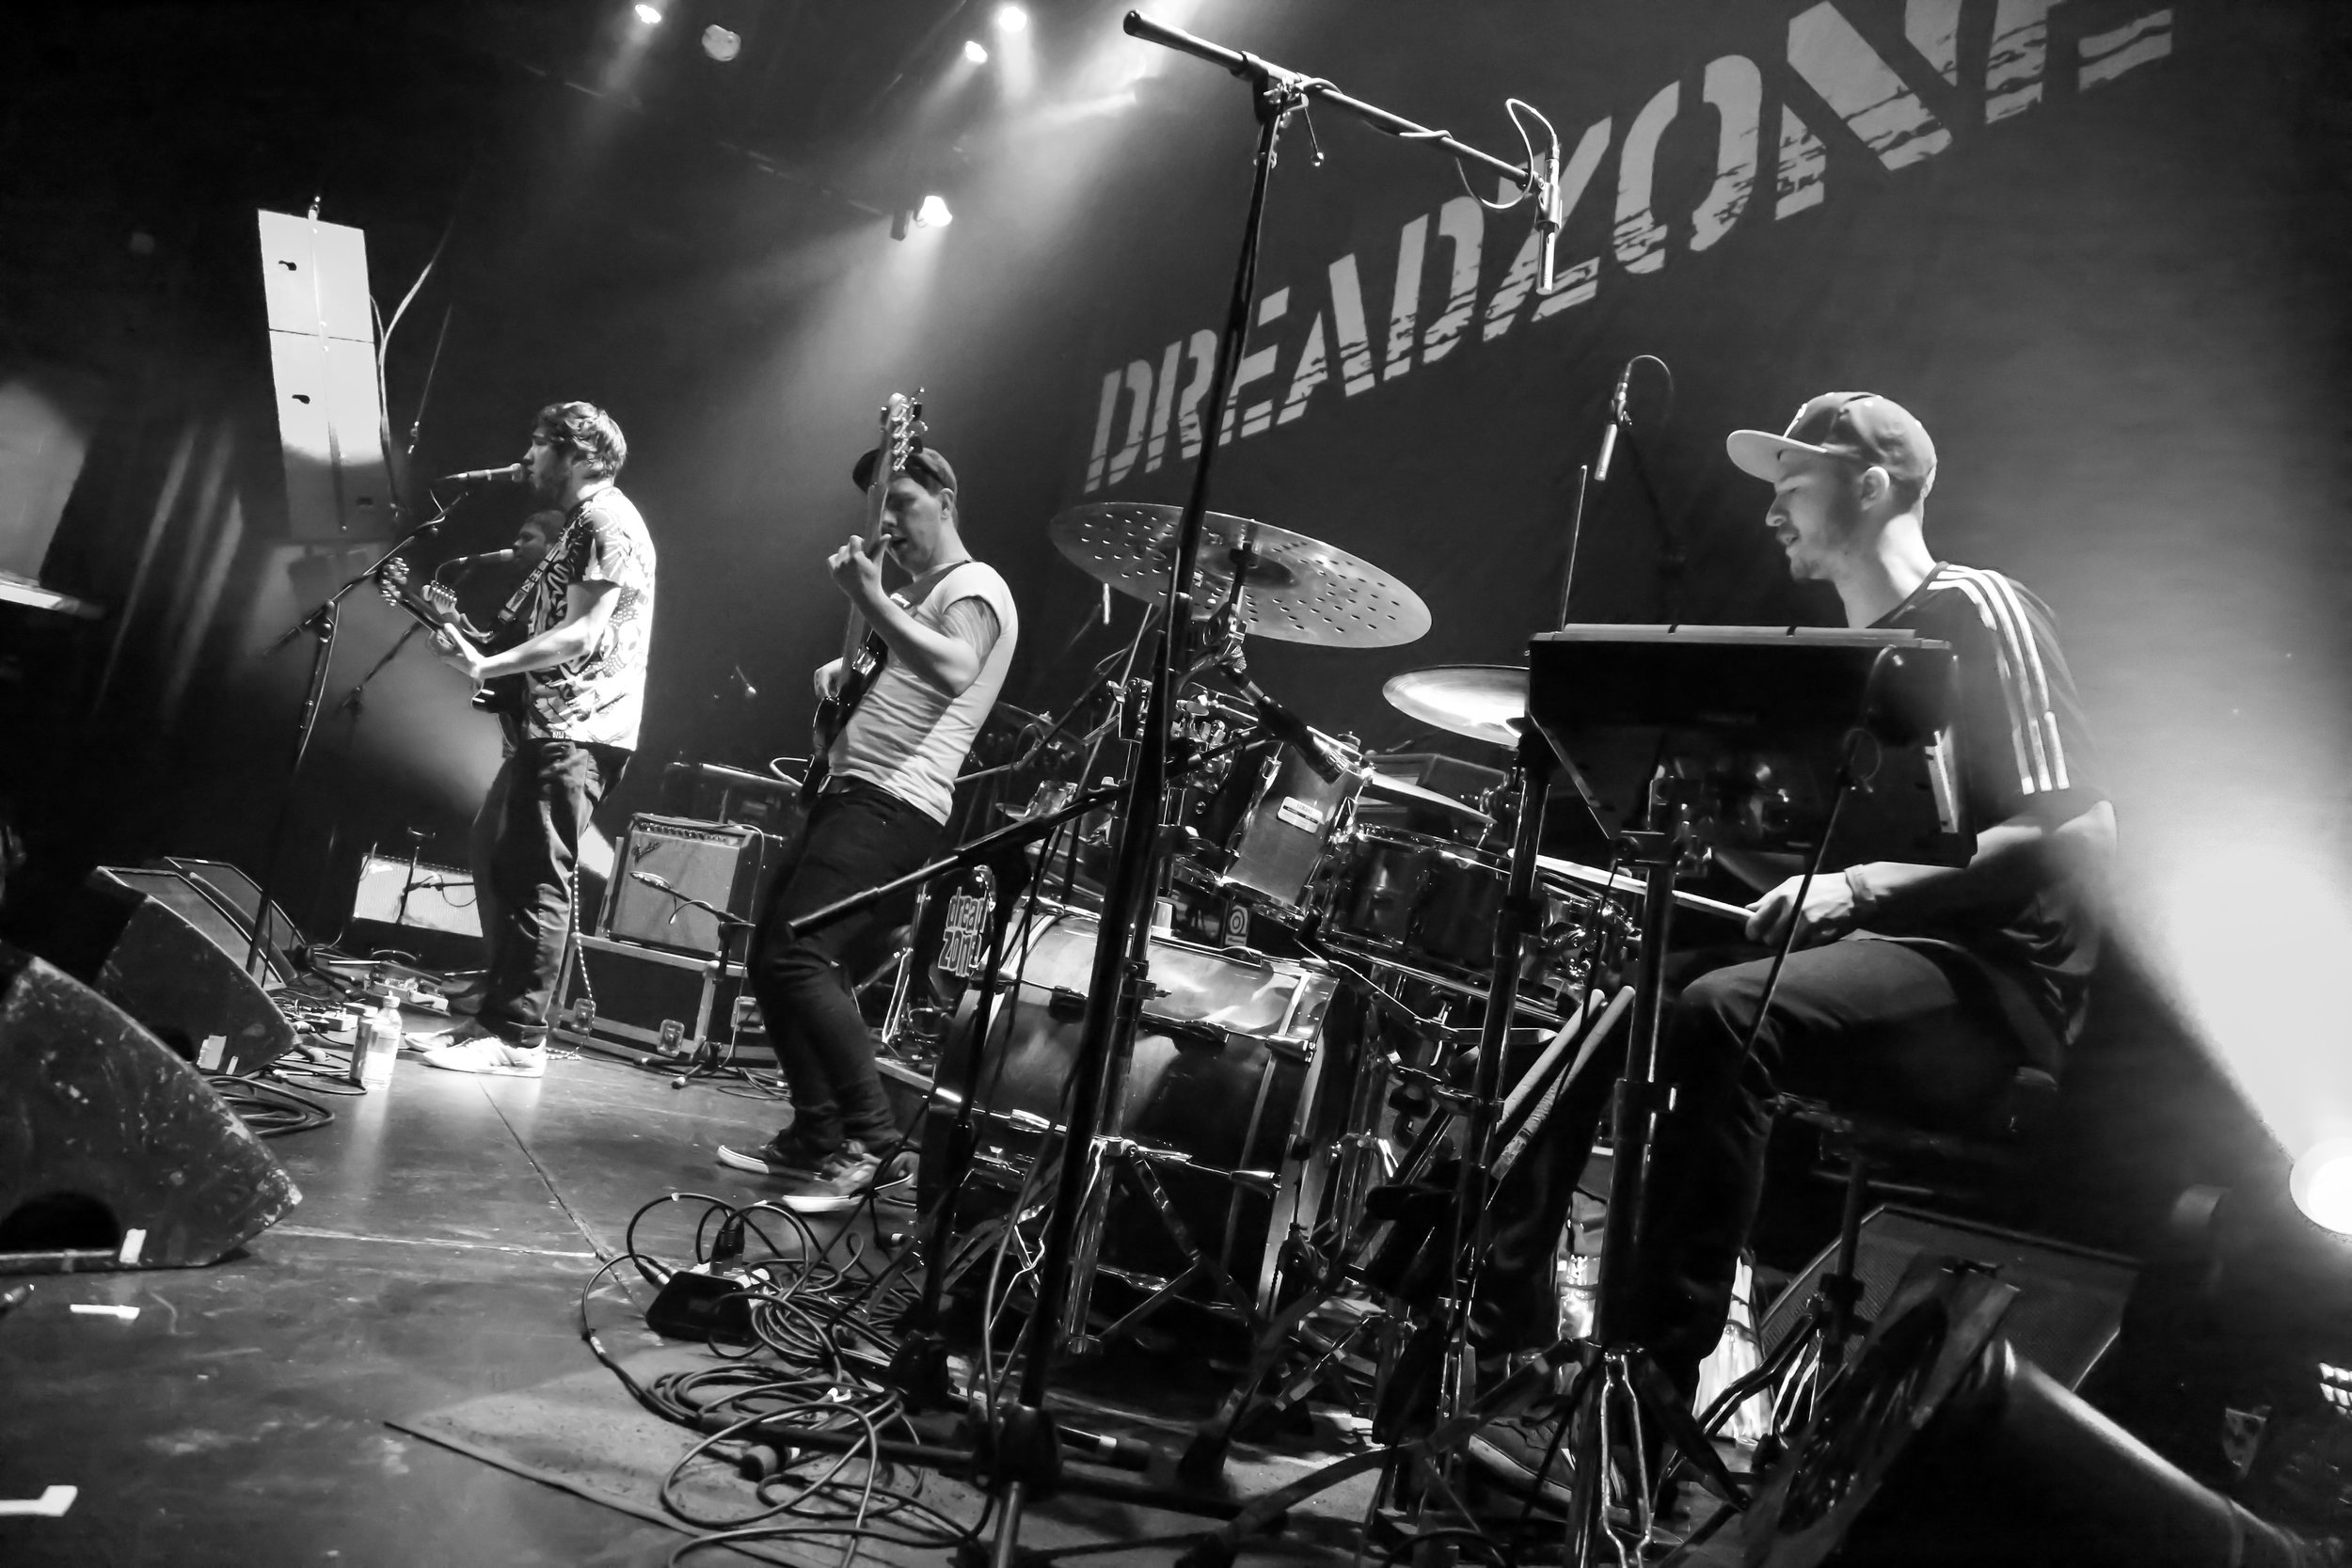 The Mighty Dreadzone Stopped By In Exeter For A Show Read Our Live